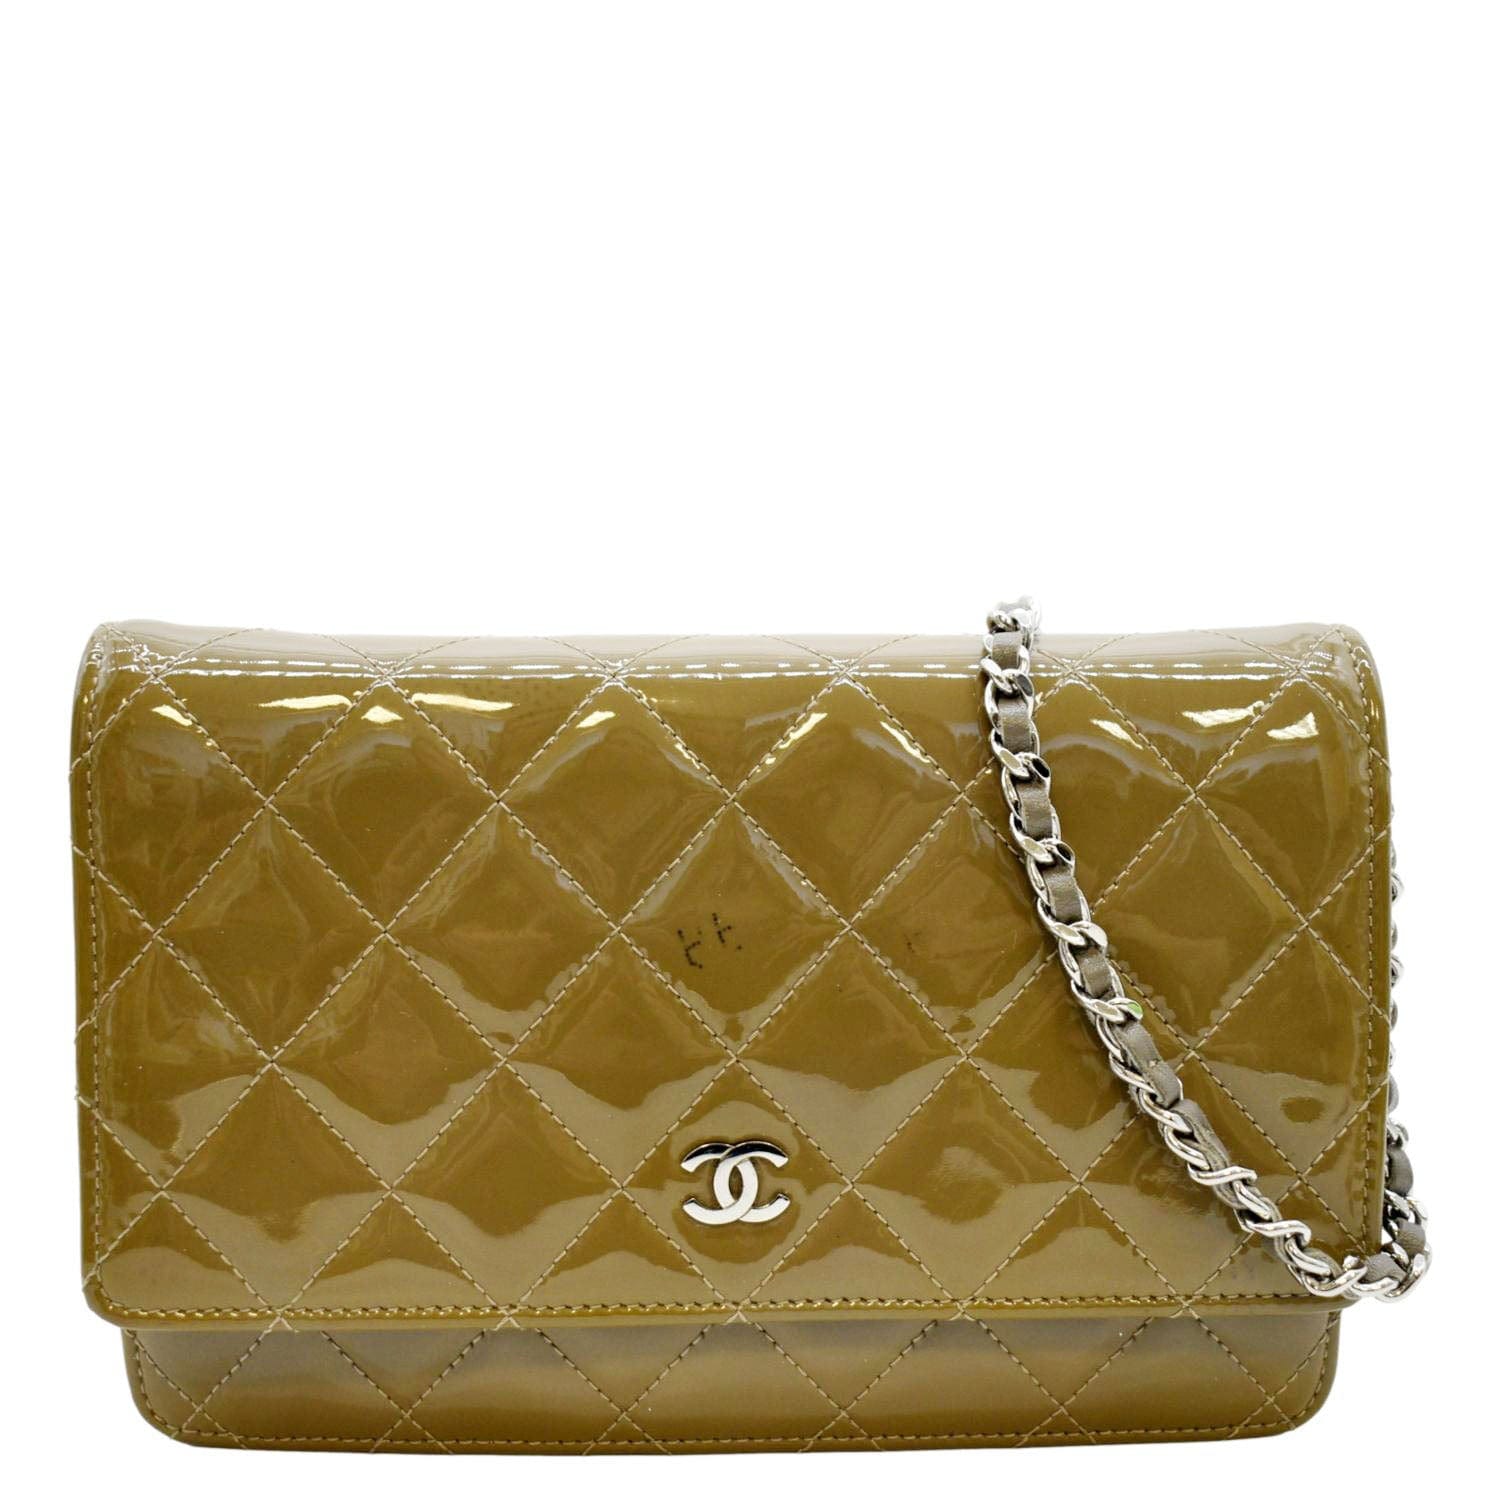 RvceShops's Closet - Owned 1998 CC 2way cosmetic bag - Artcurial 2639  2014-11 Chanel slingbacks Louis Vuitton - Chanel slingbacks Chanel  slingbacks Pre